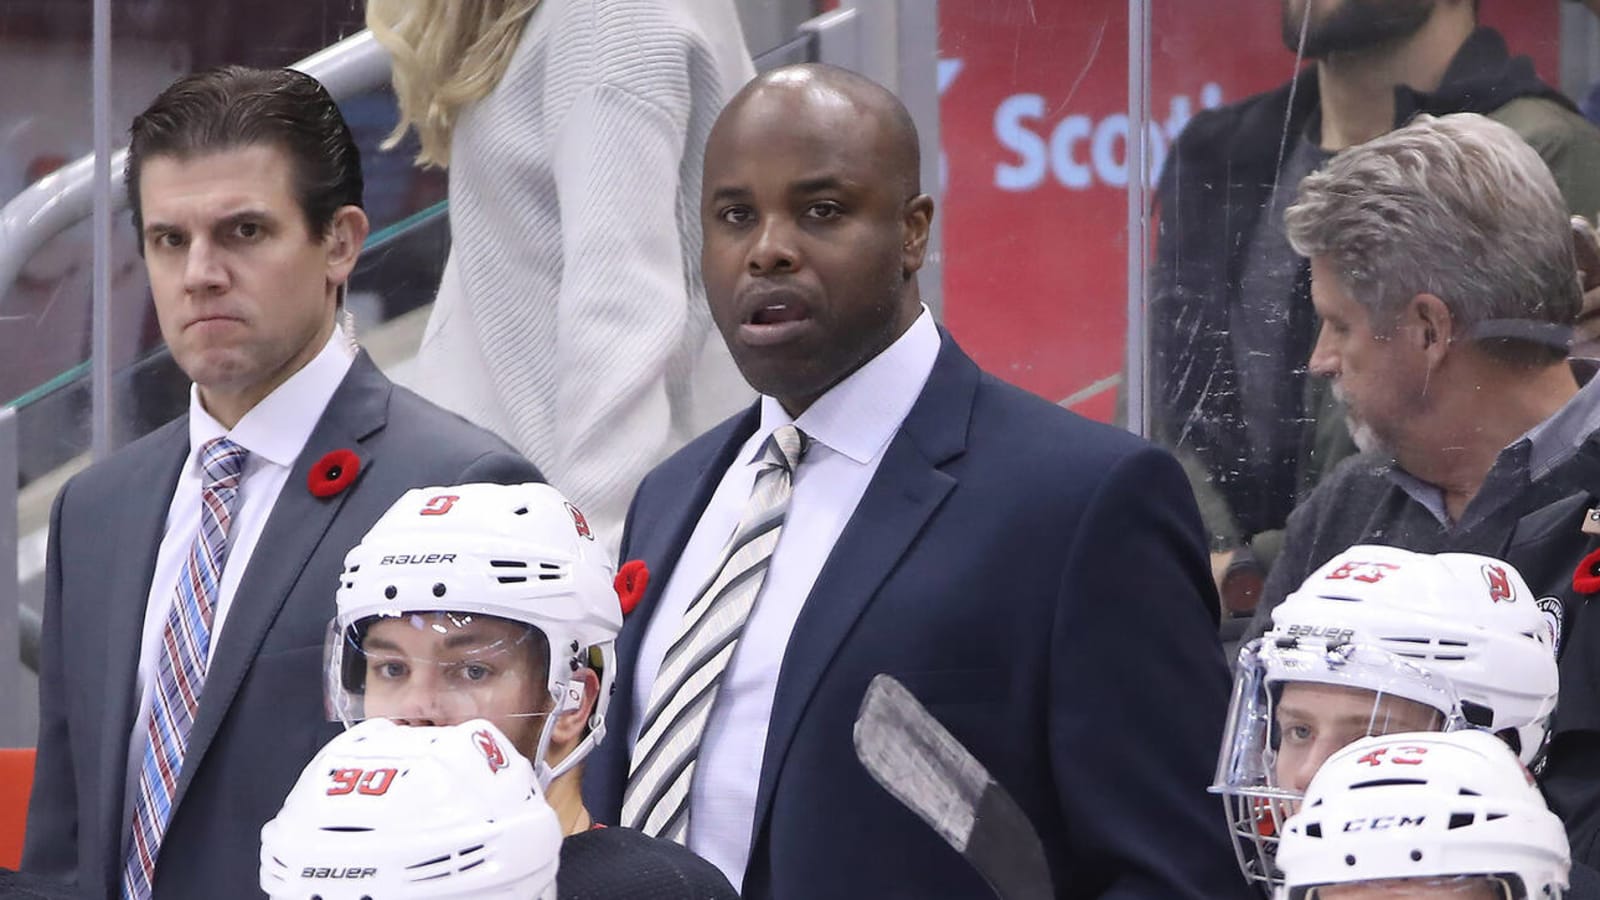 Sharks to make Mike Grier first Black GM in NHL history